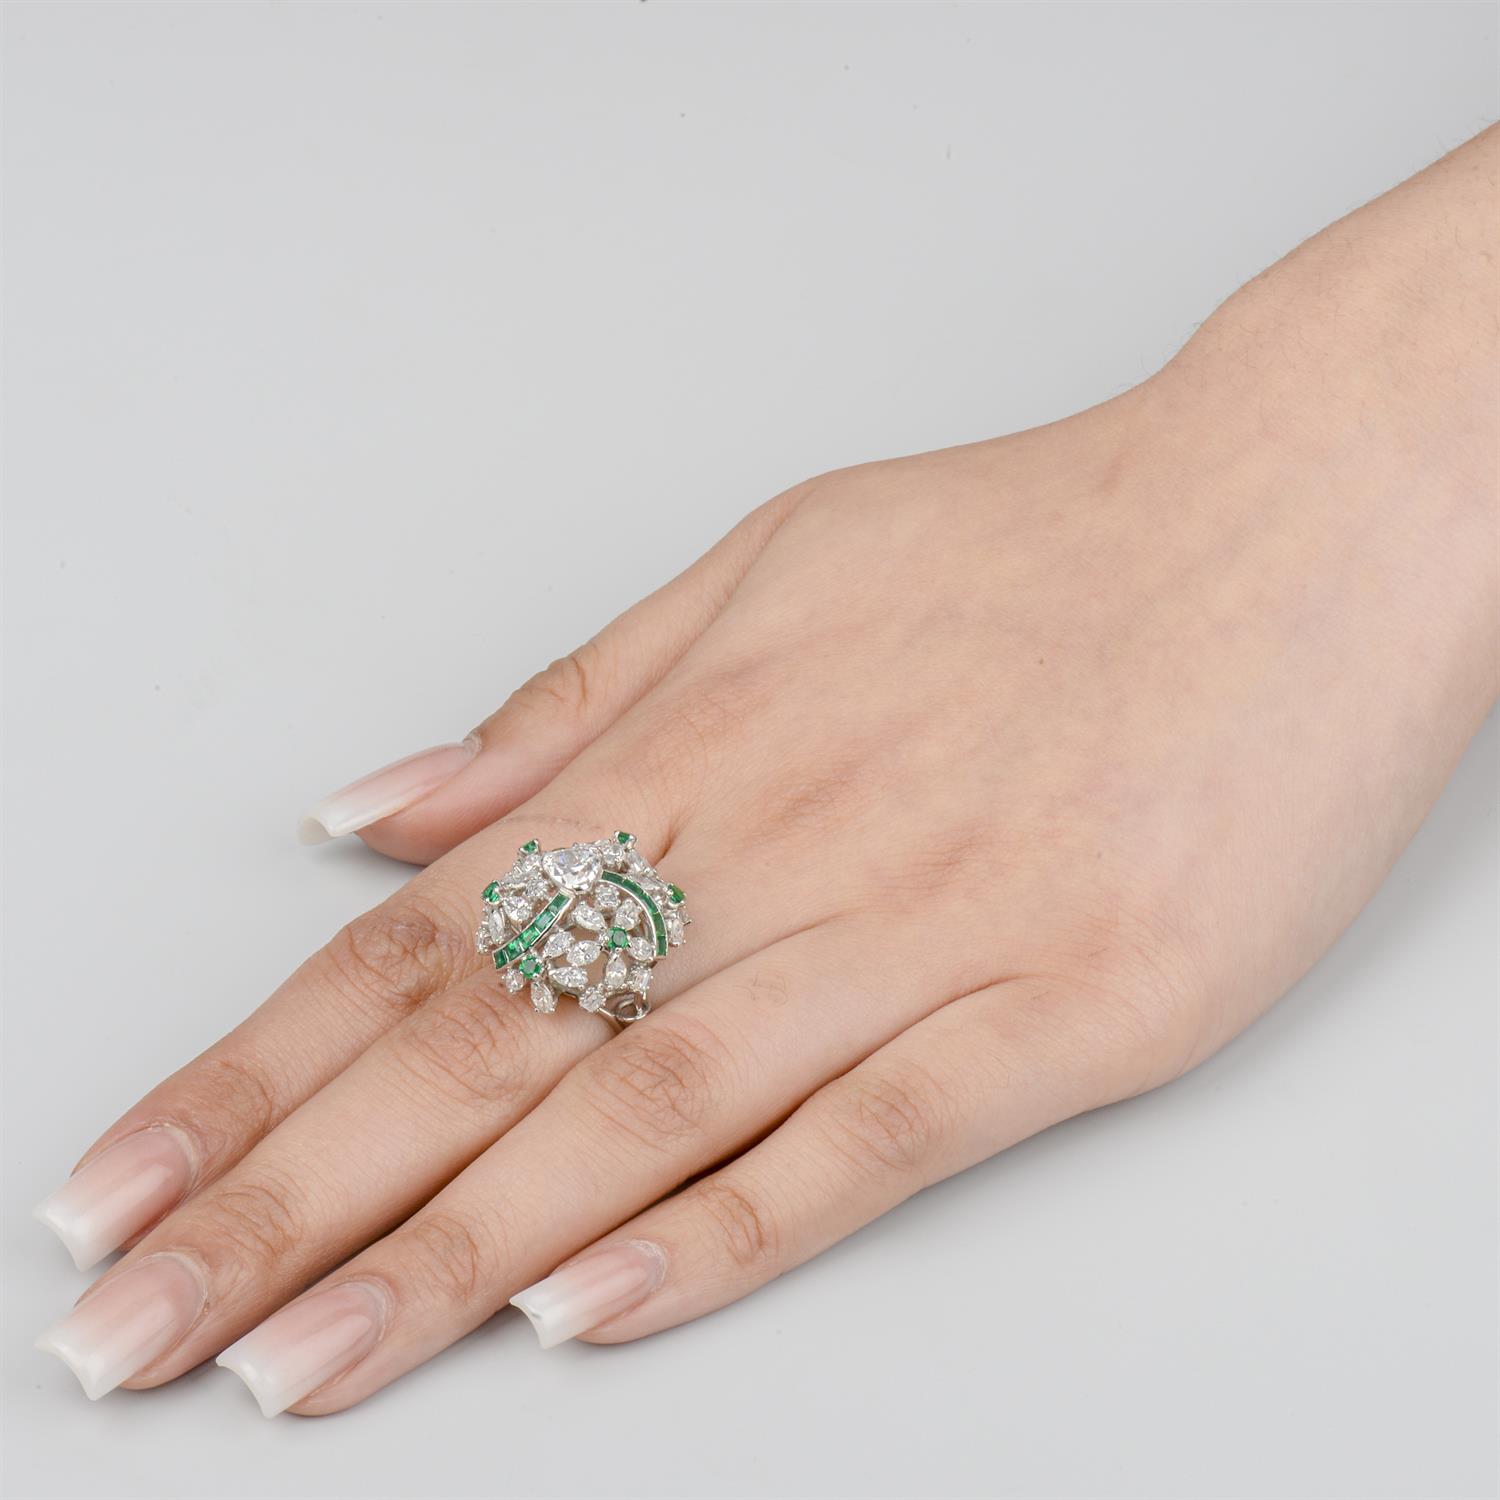 Mid 20th century platinum diamond and emerald floral ring - Image 6 of 6